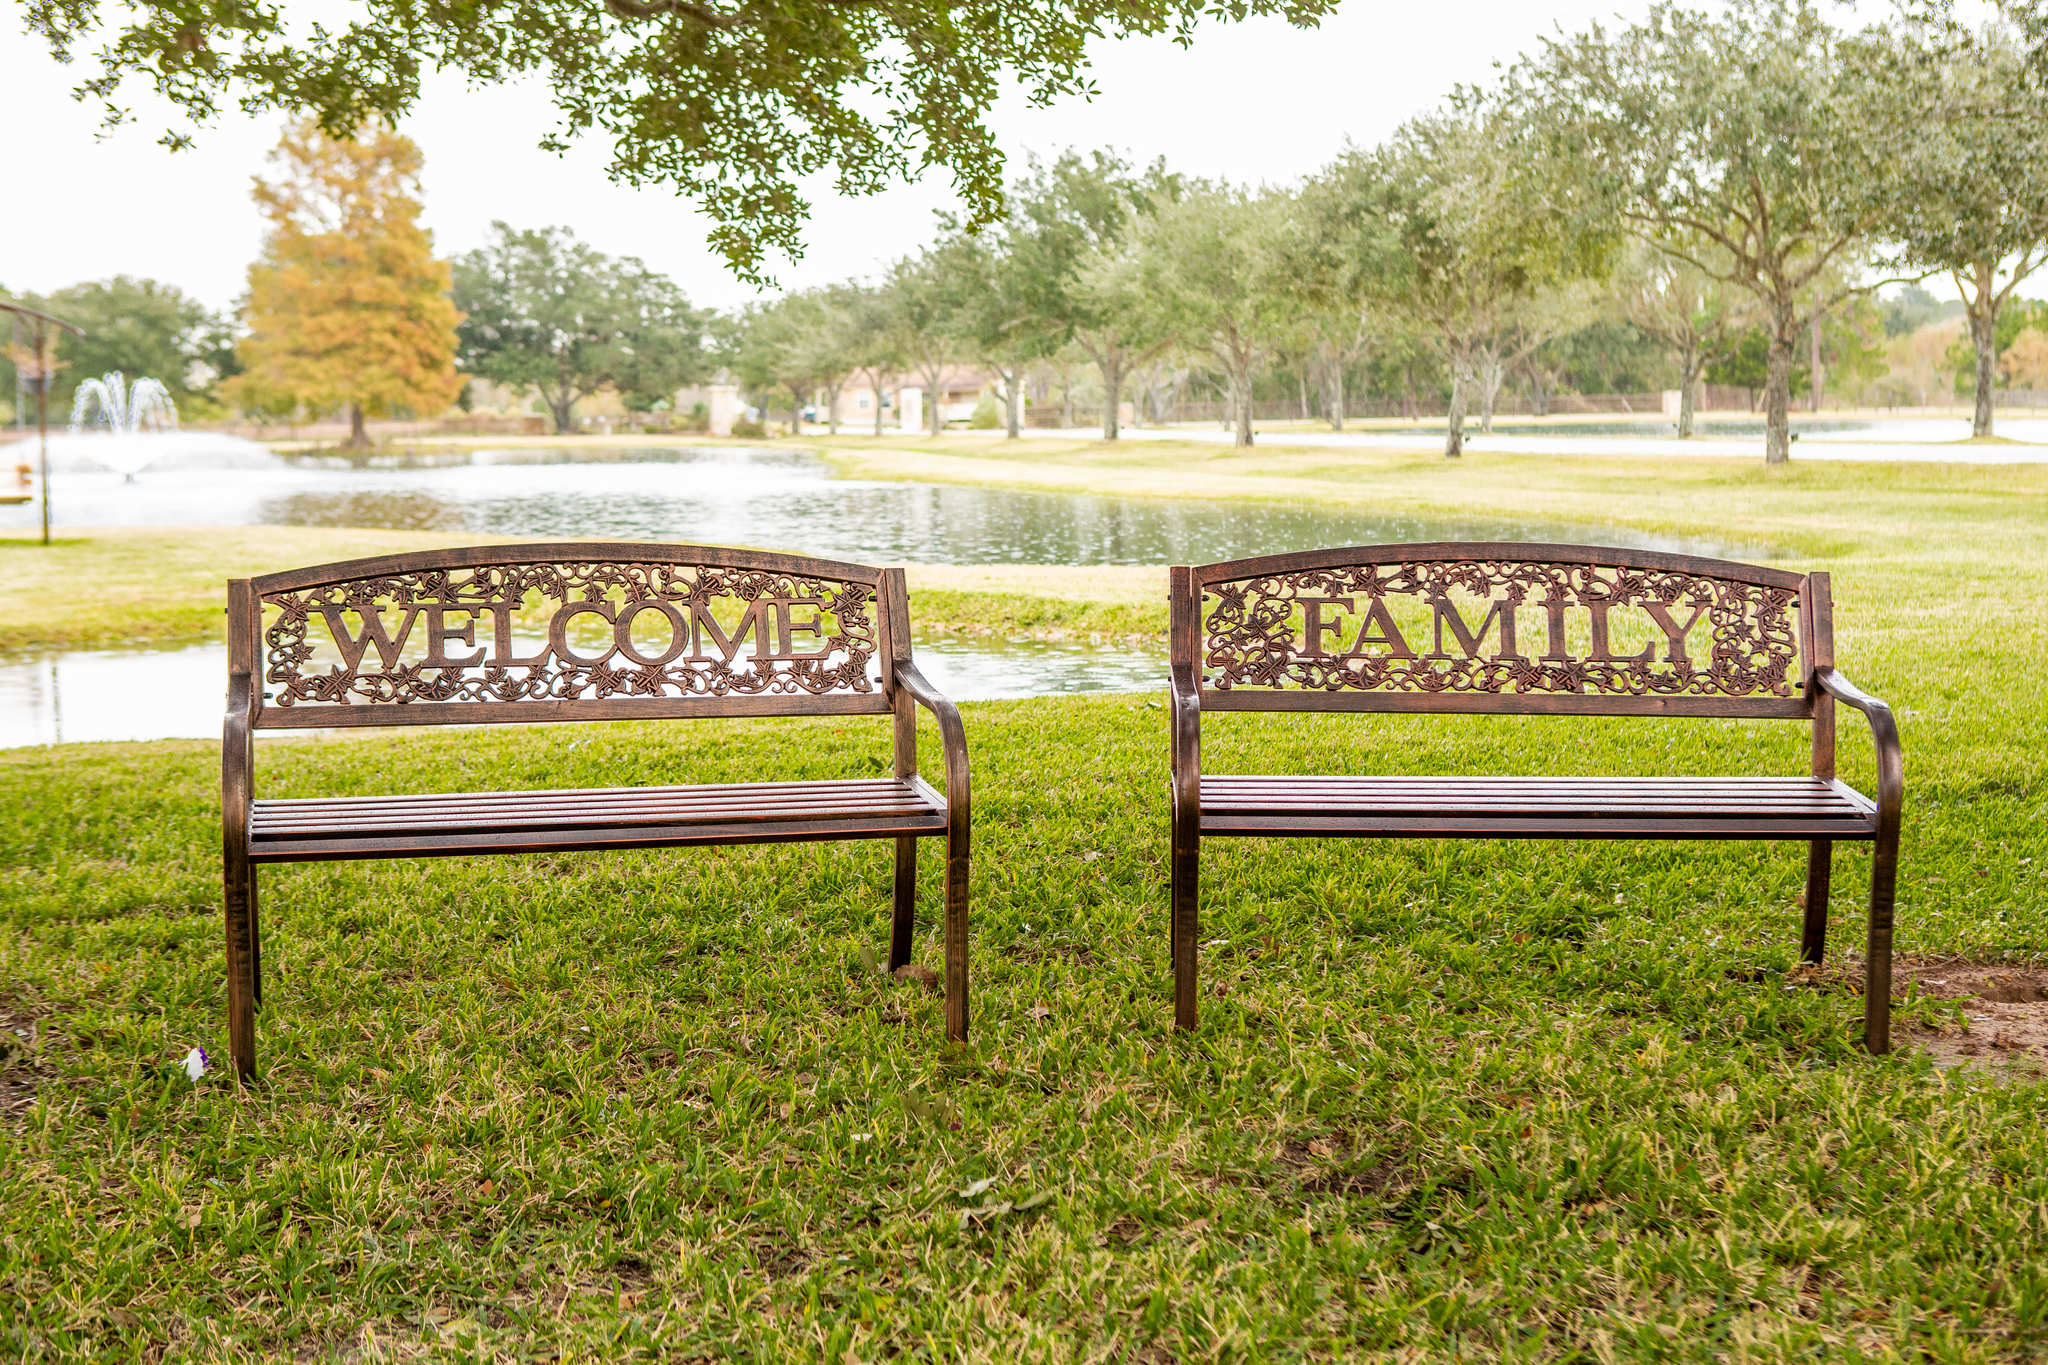 Metal Benches on grass